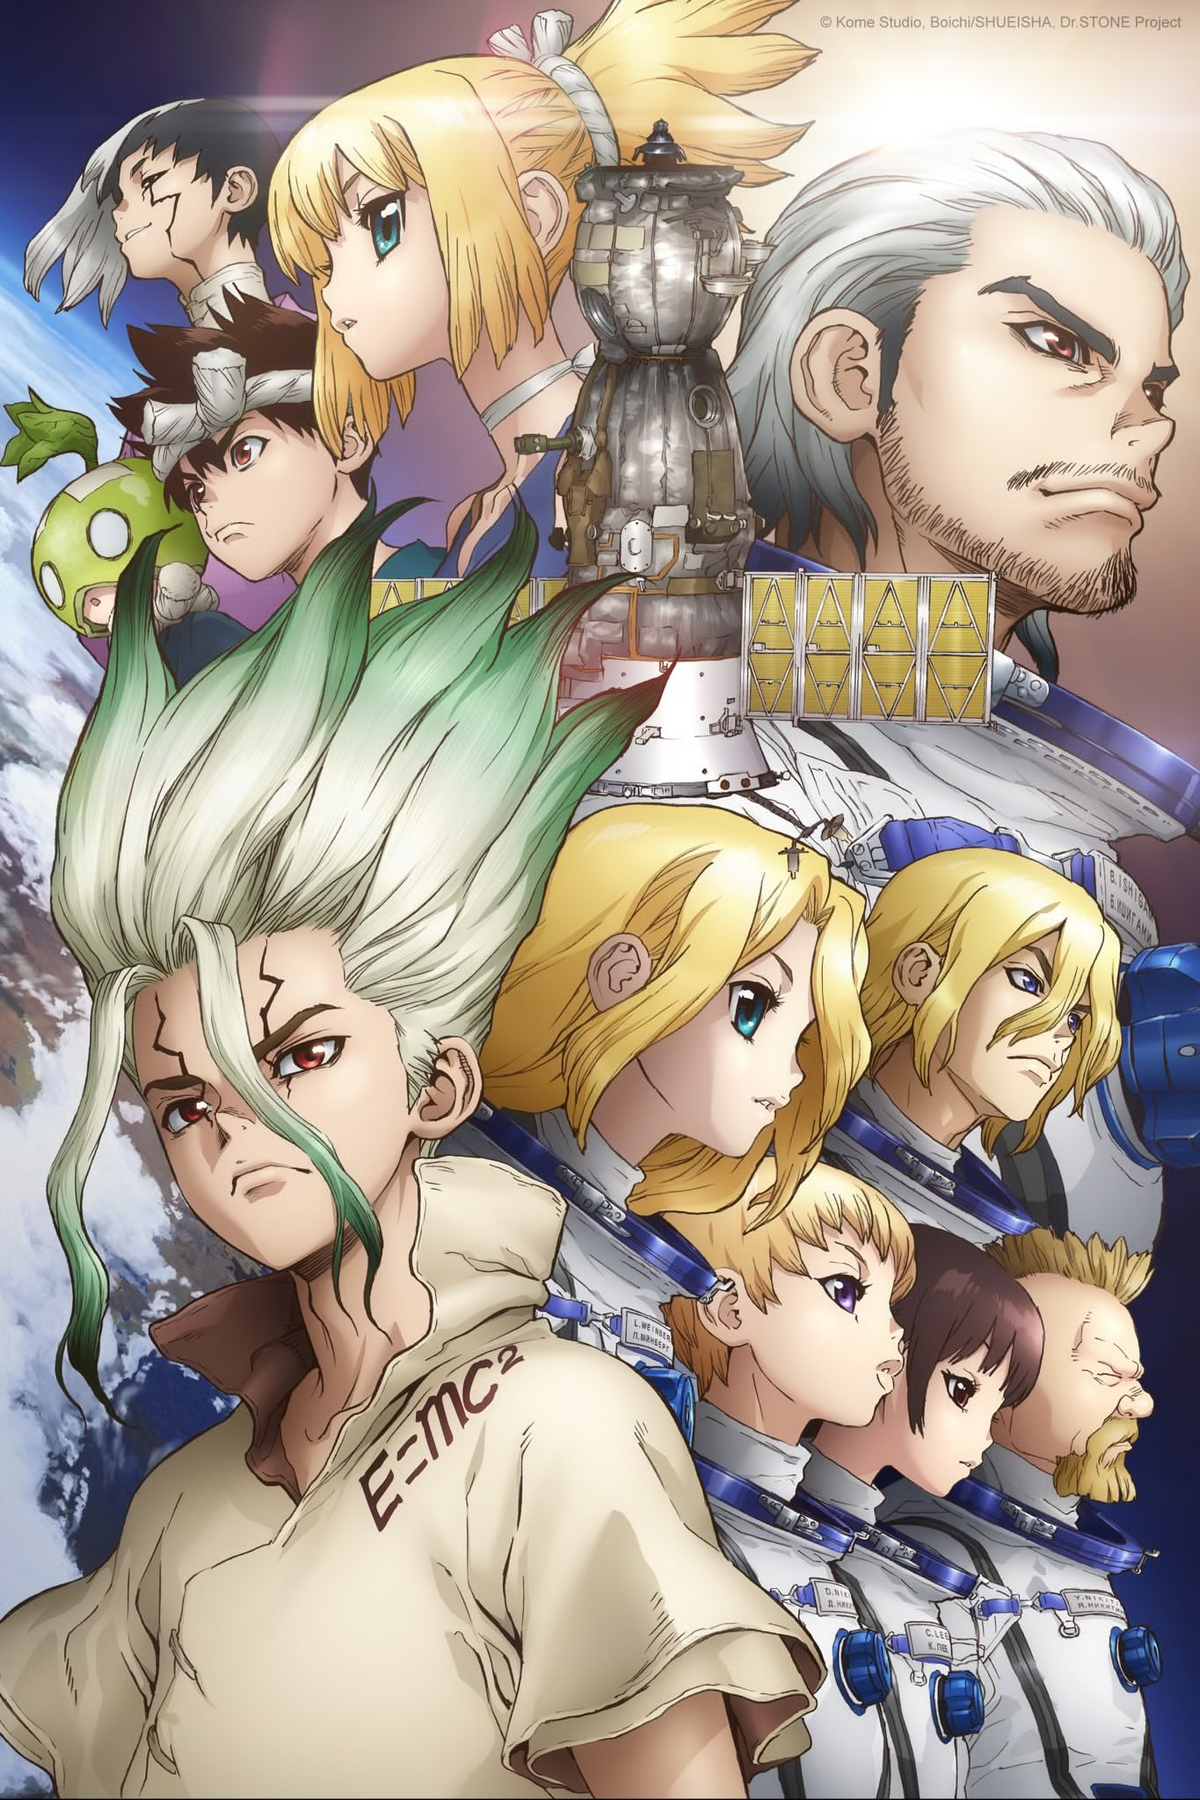 Dr. Stone: New World Episode 14 - A New Ally to the Kingdom of Science  Appears